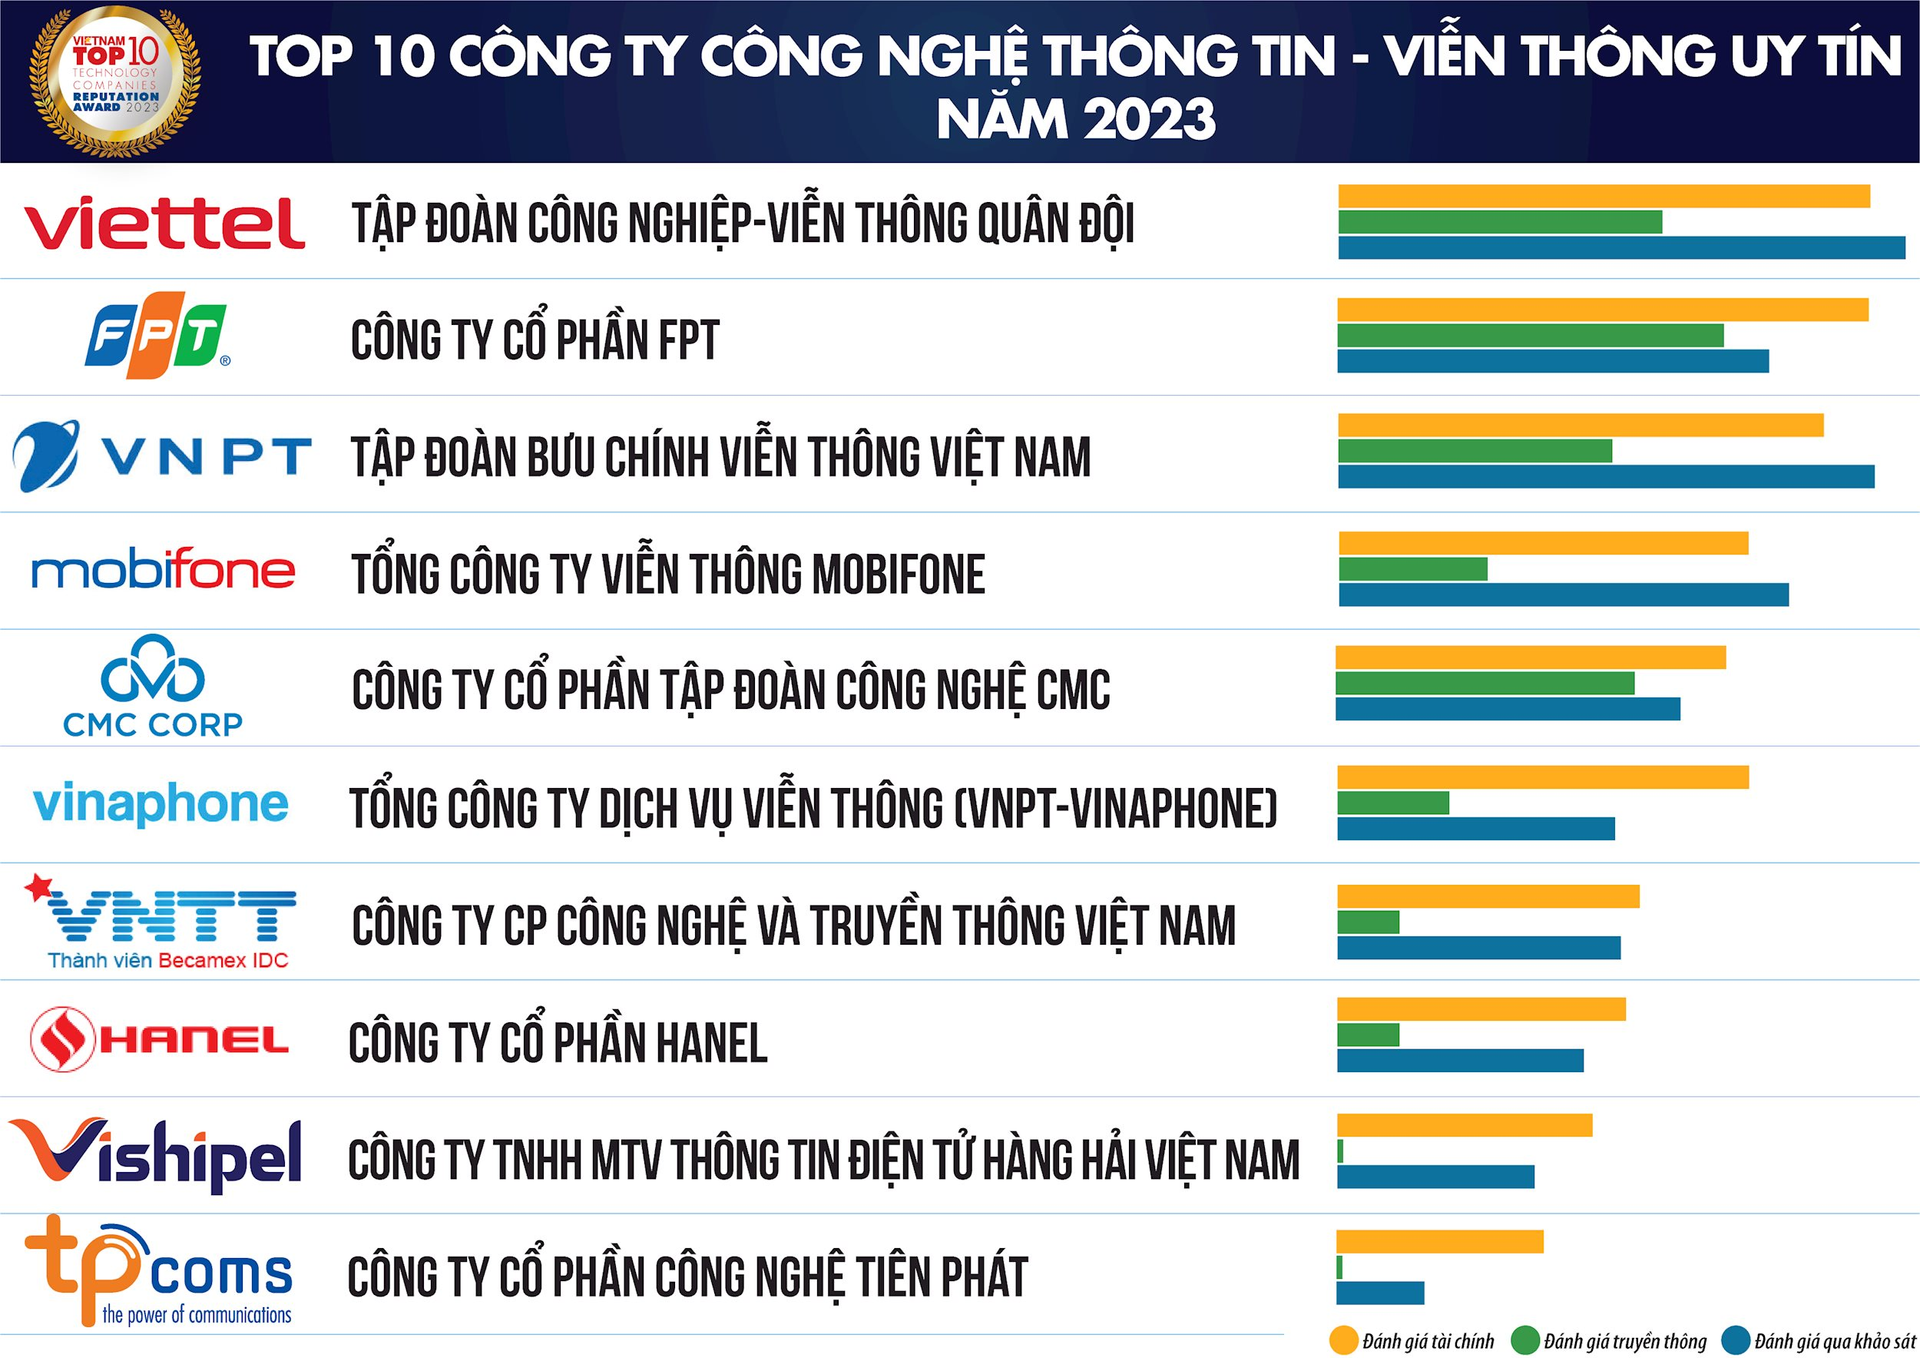 tcbc-top-10-cong-nghe-2023_final_danh-sach-1.png